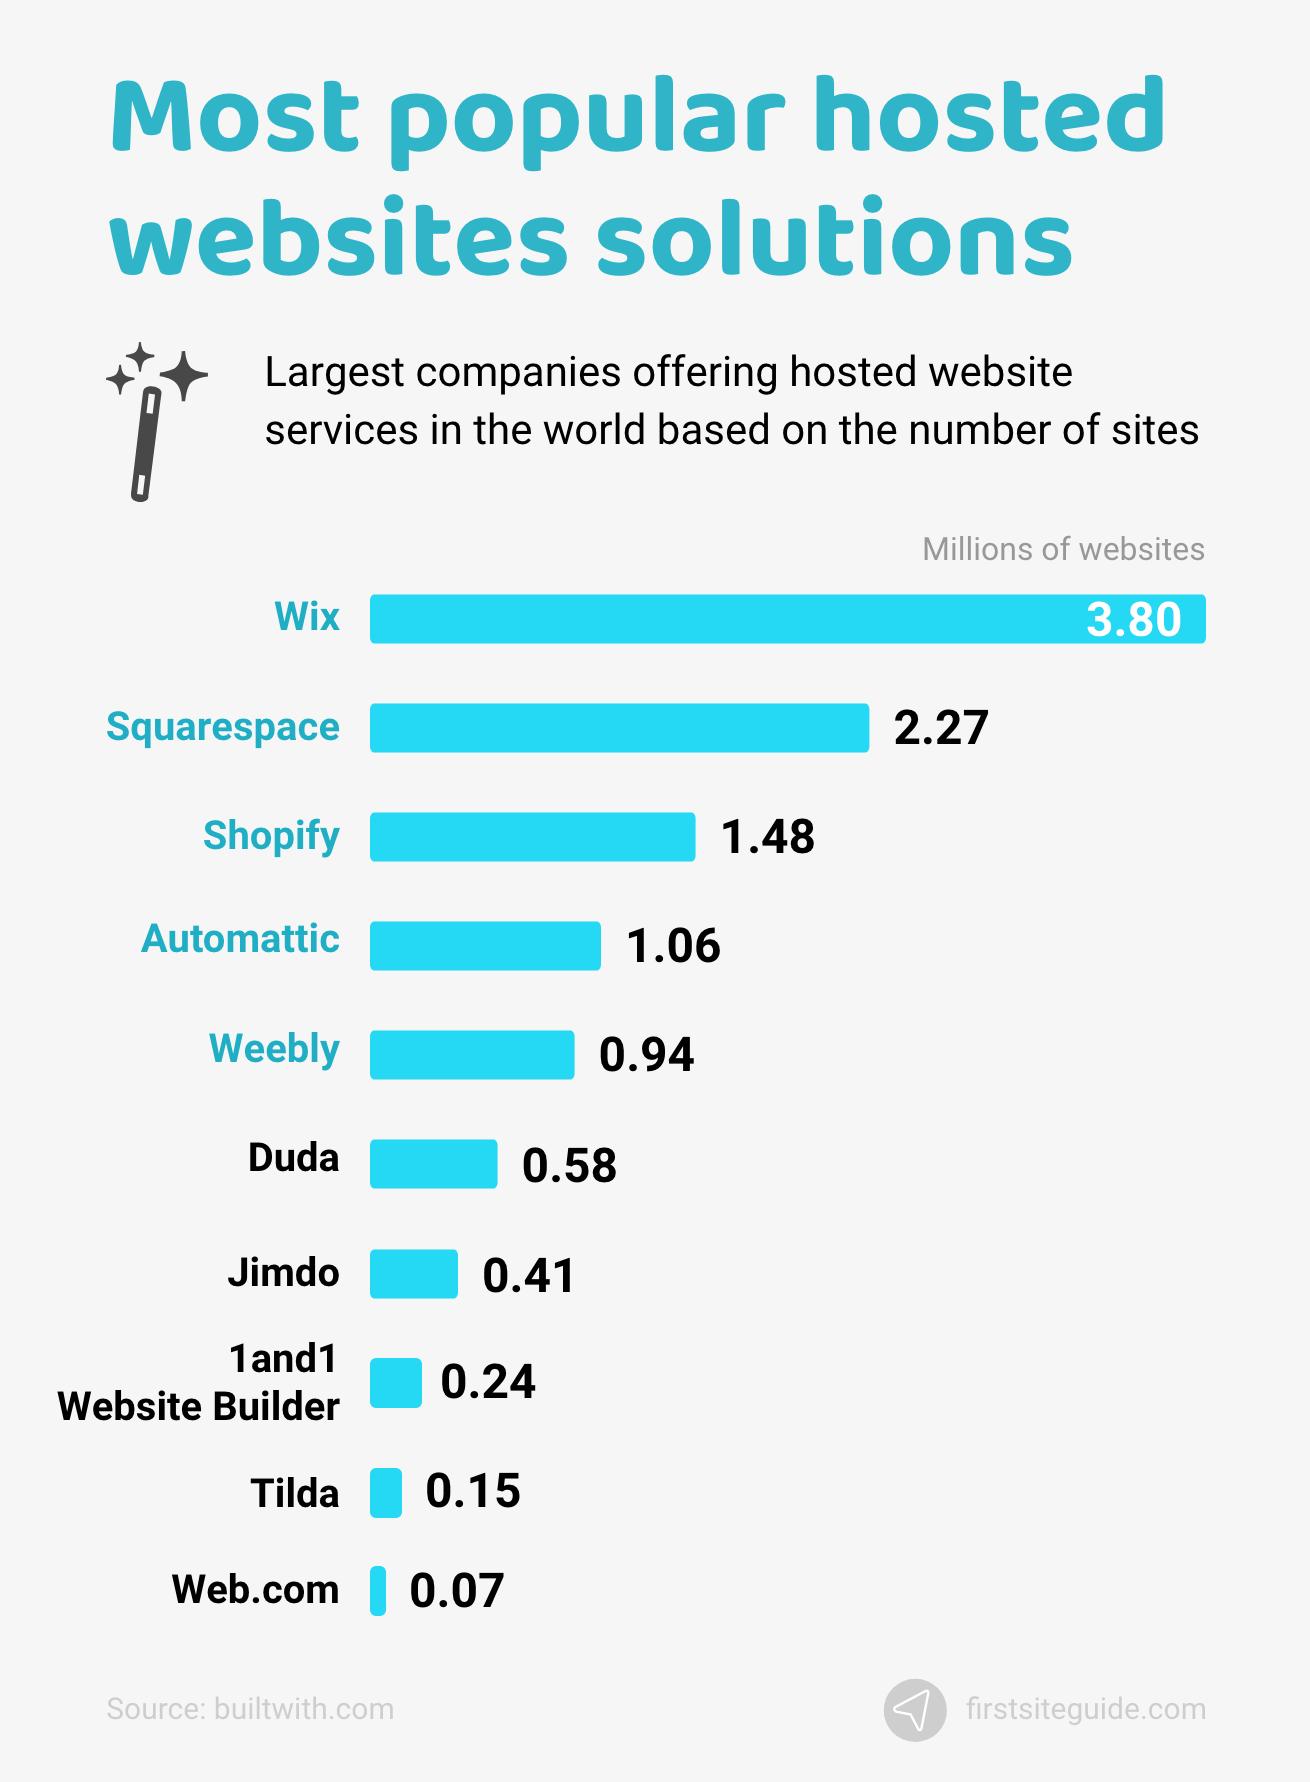 Most popular hosted websites solutions